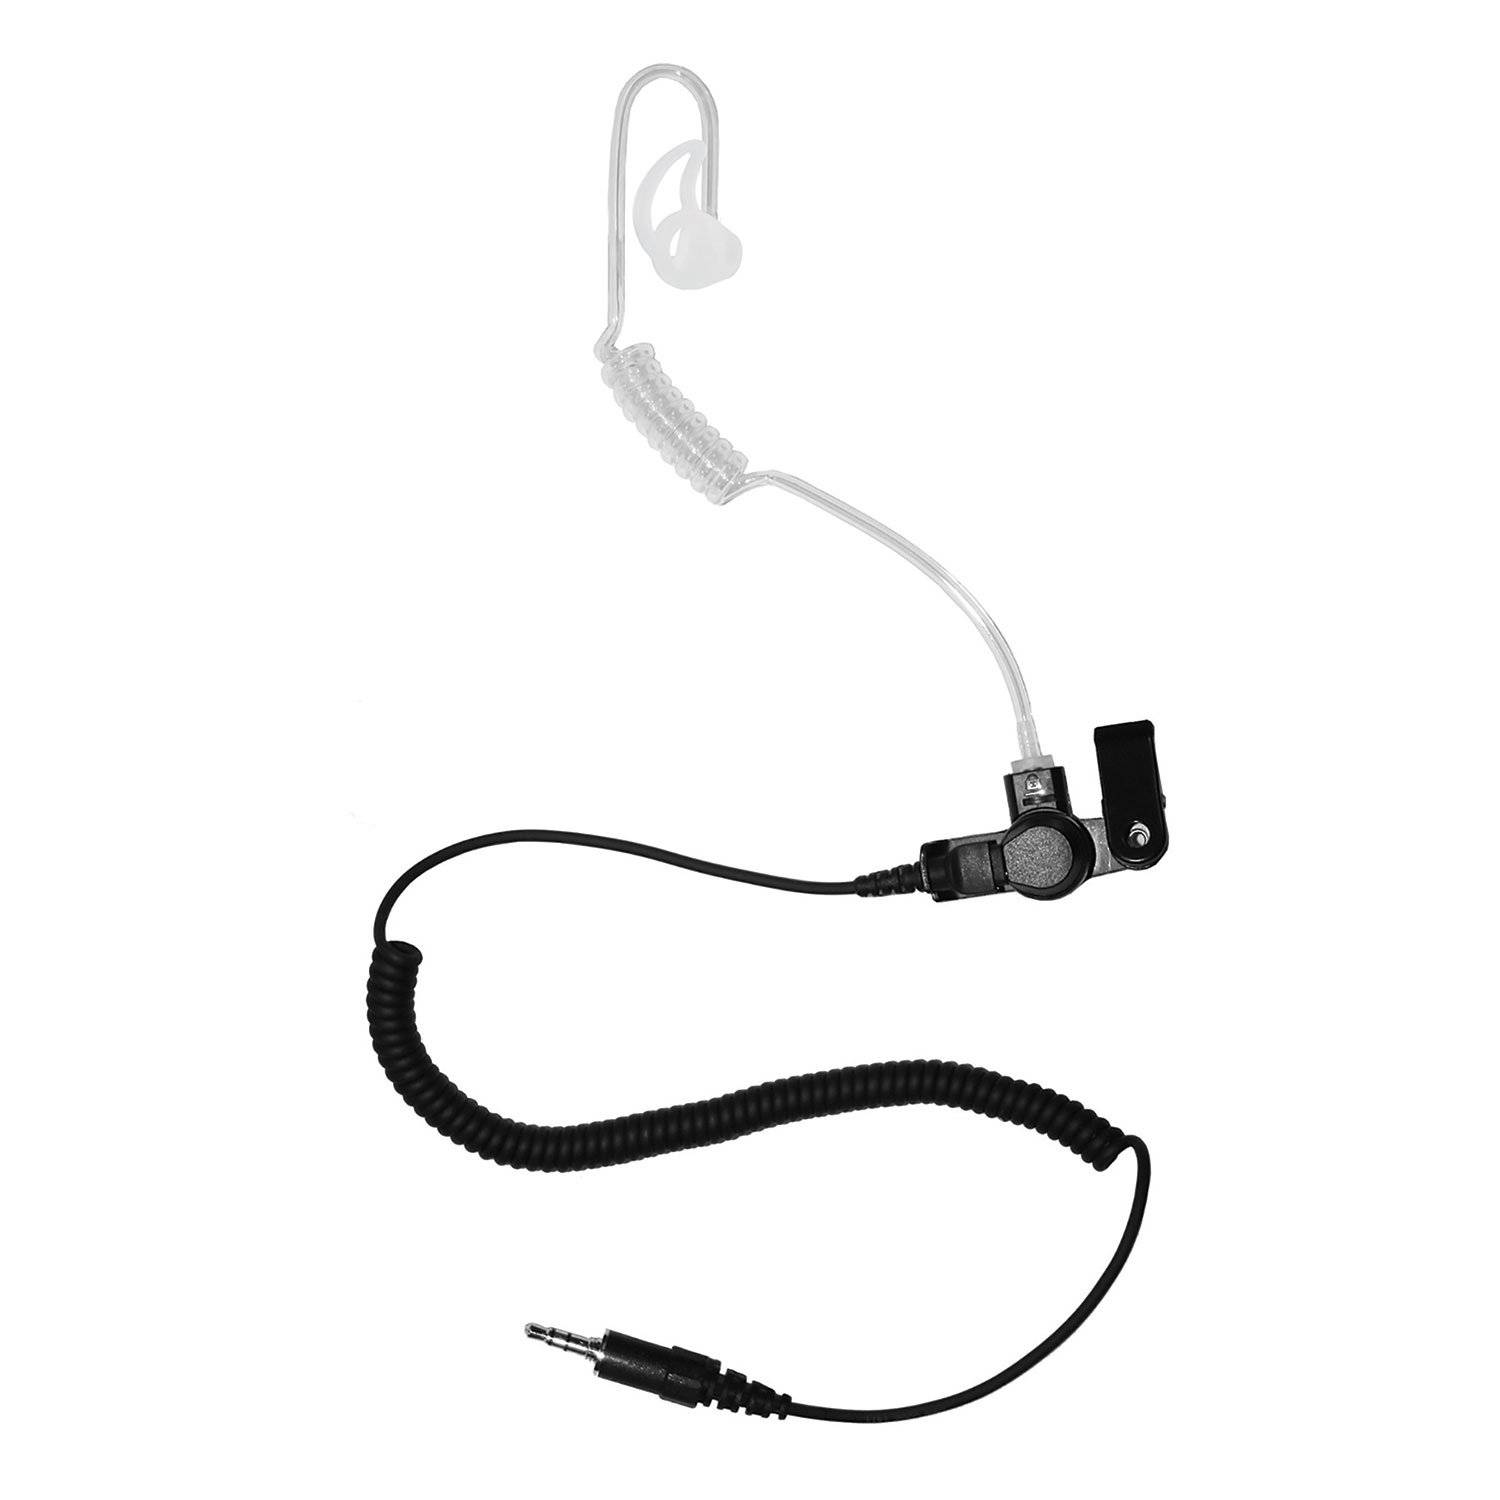 Ear Phone Connection Fox Listen-Only Earpiece with 3.5mm Con